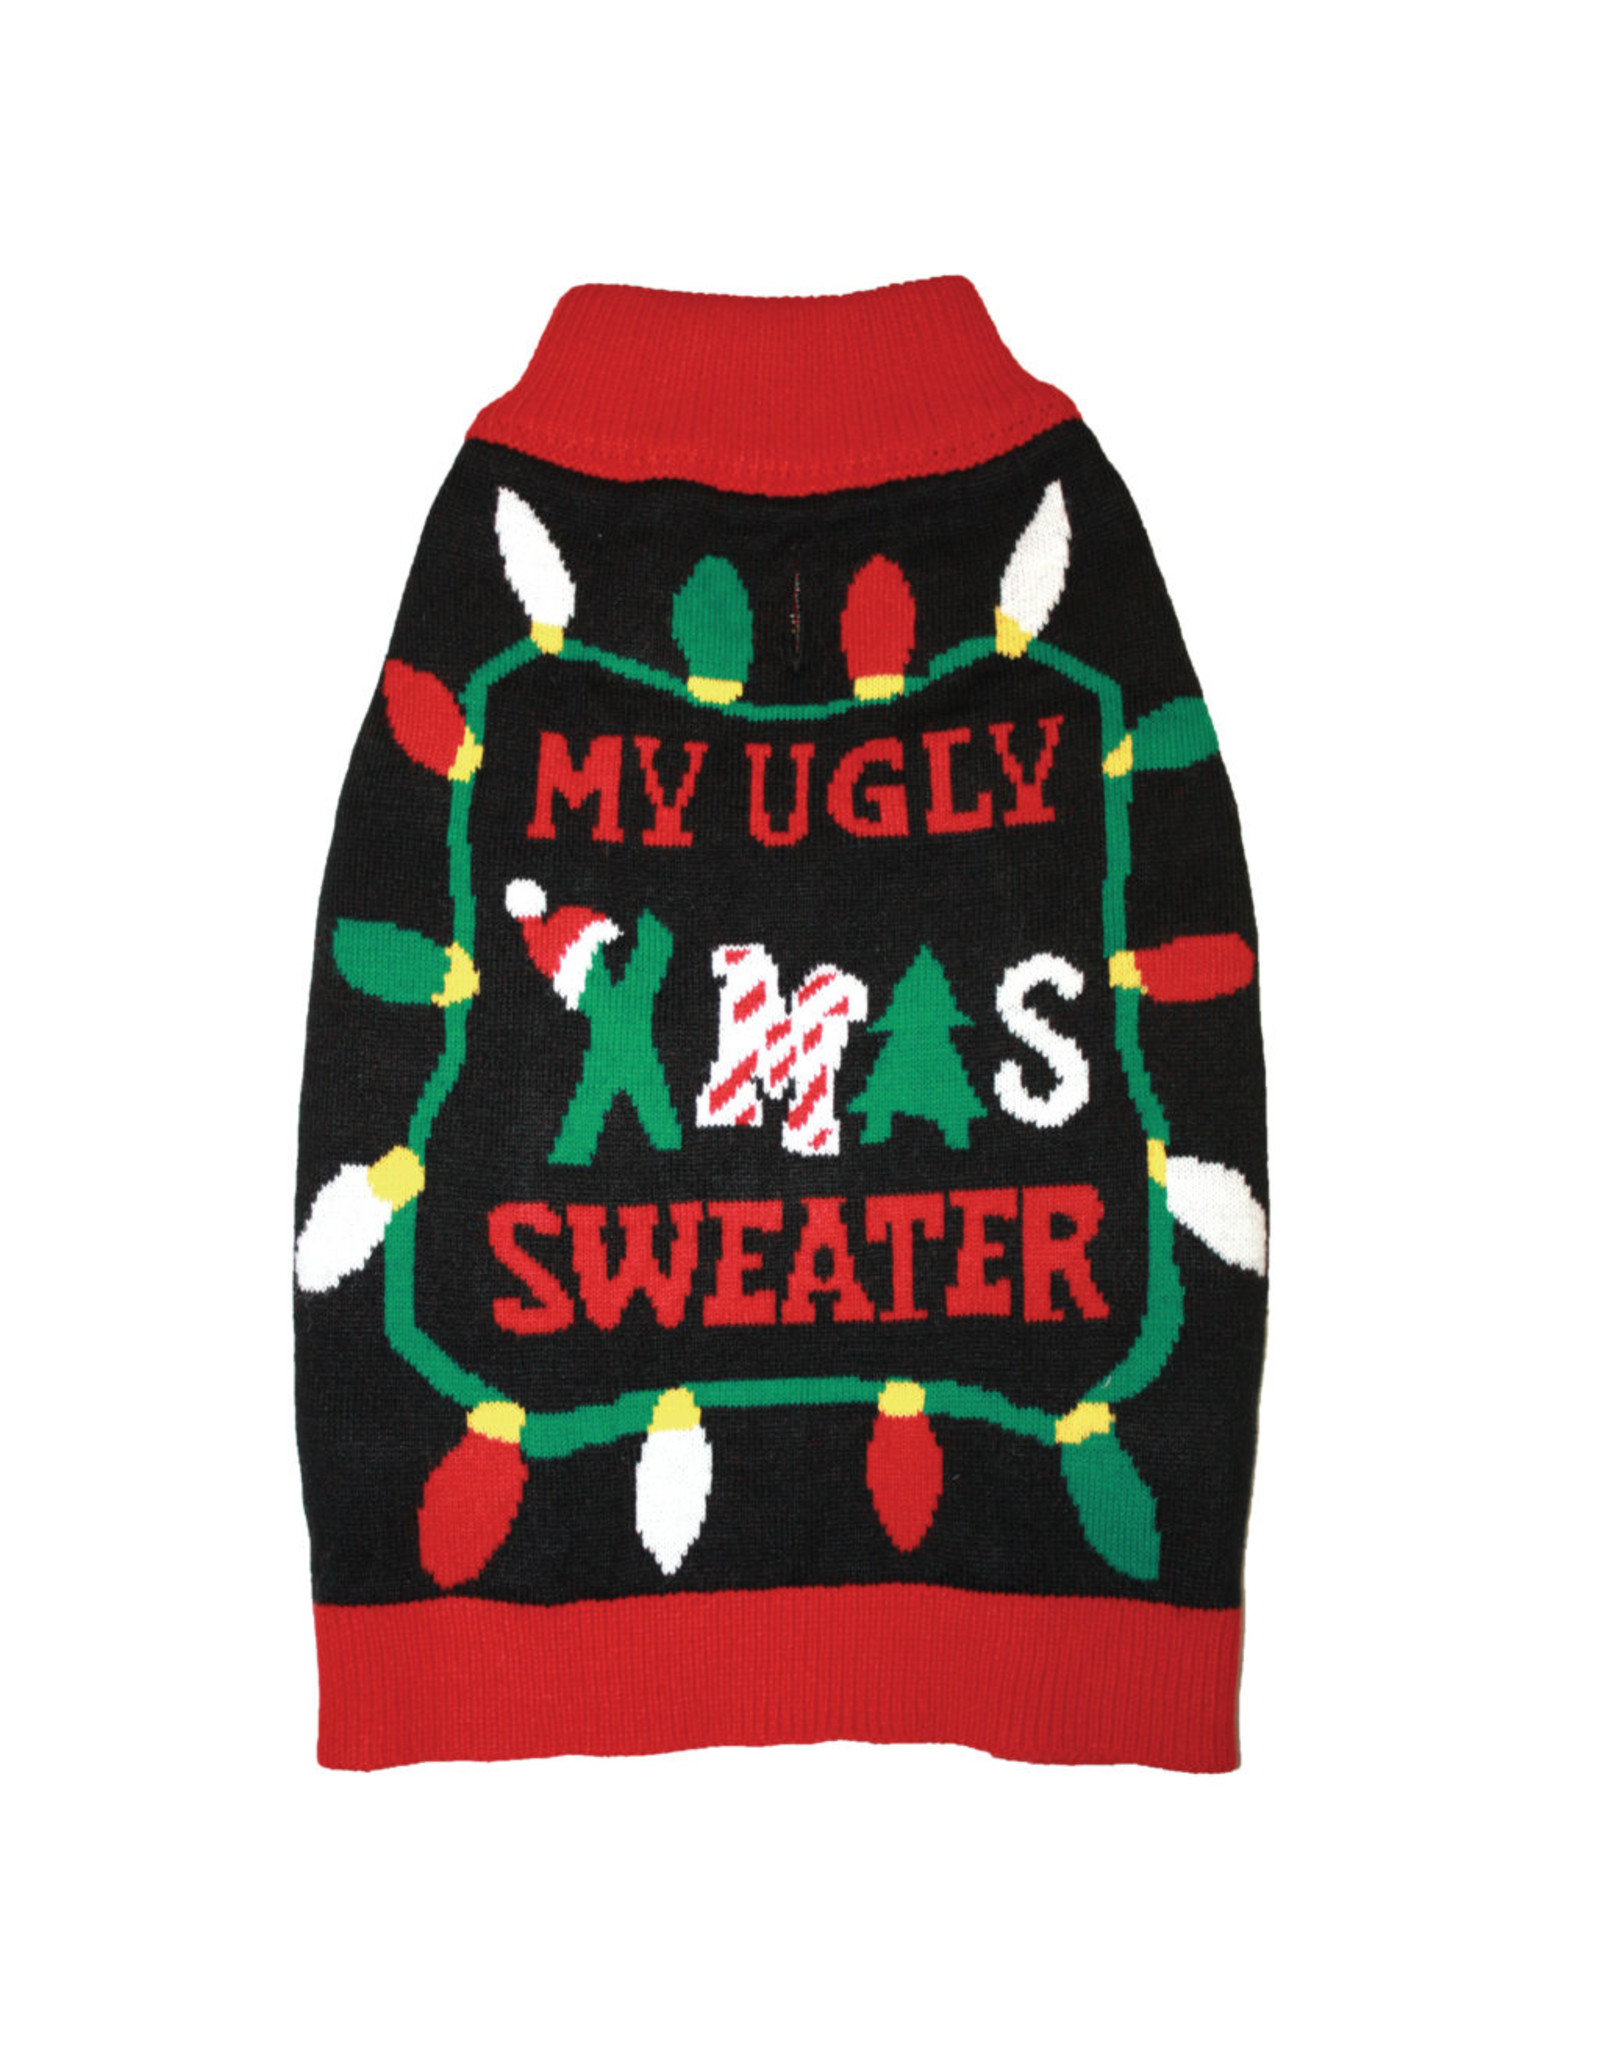 Spot - Ethical Pet Products Xmas Ugly Sweater